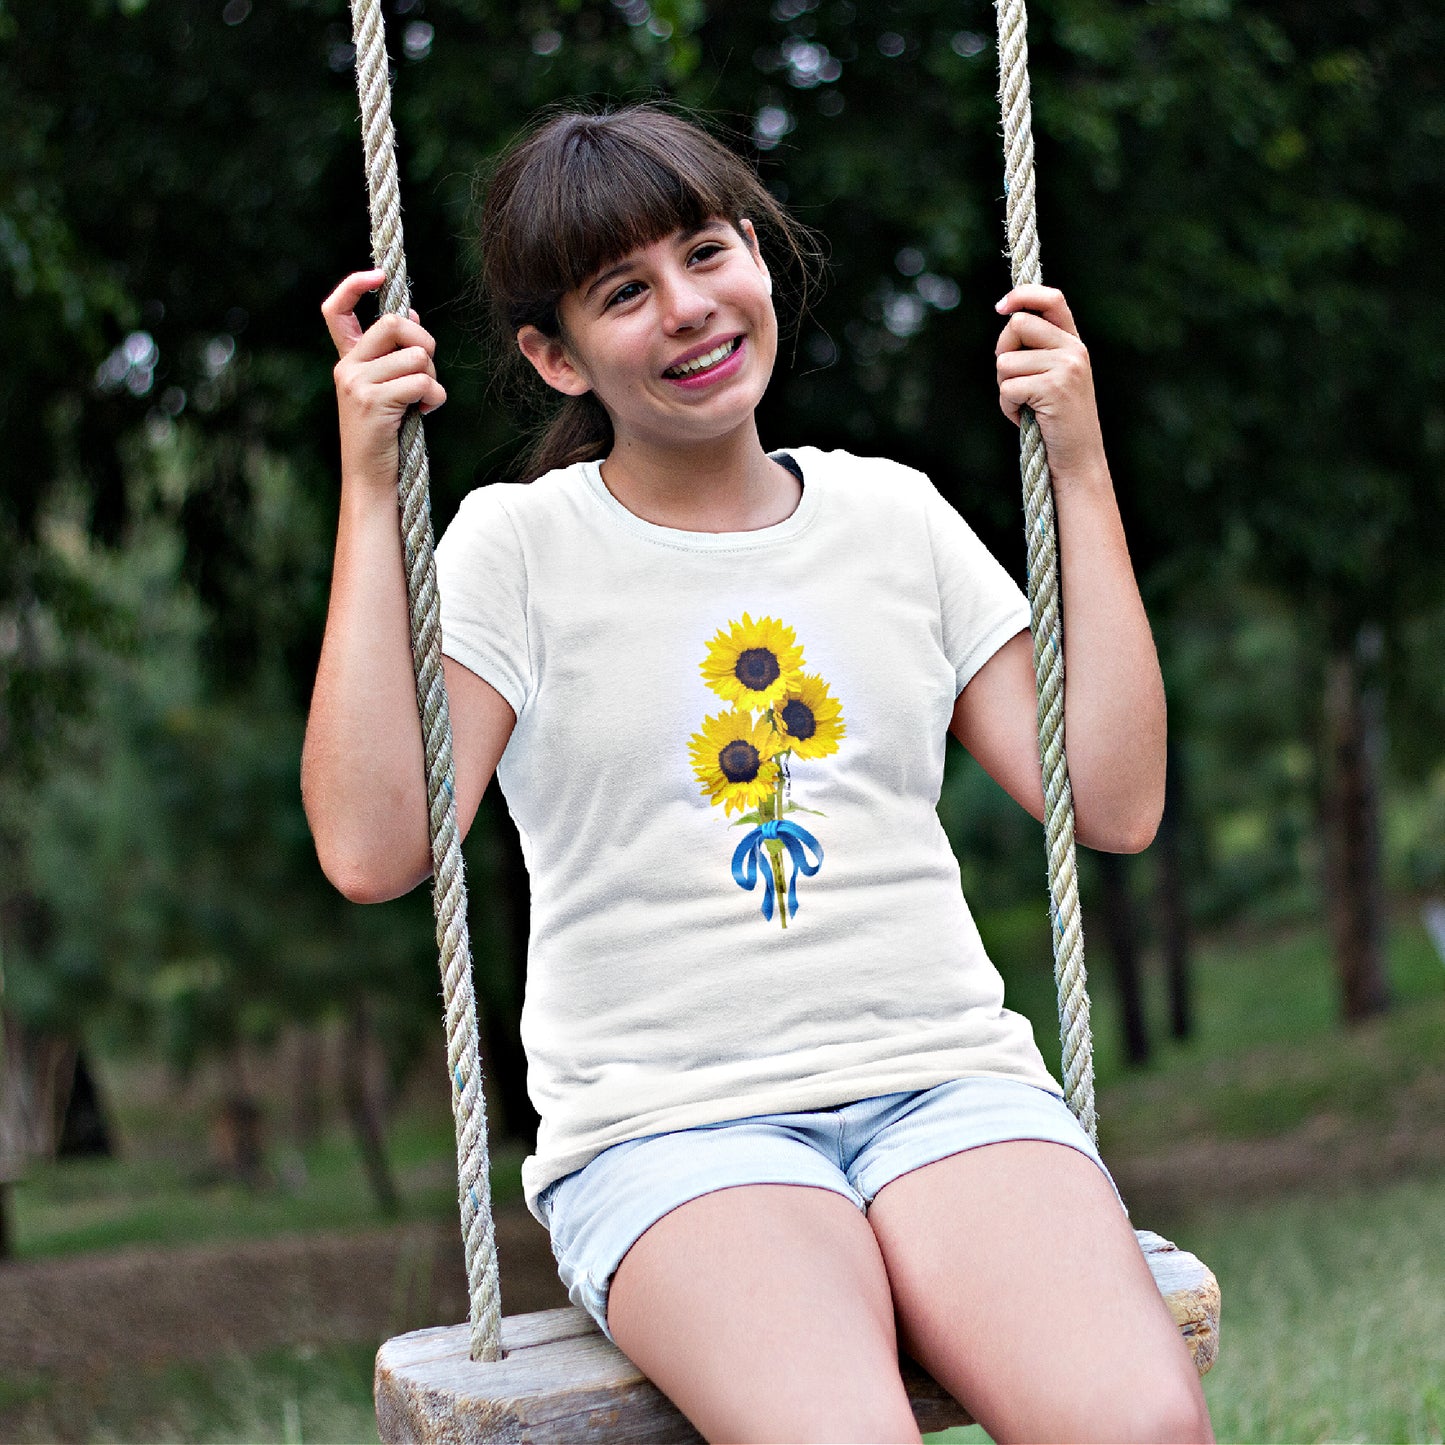 Mock up of a girl on a swing in a park wearing our white T-shirt